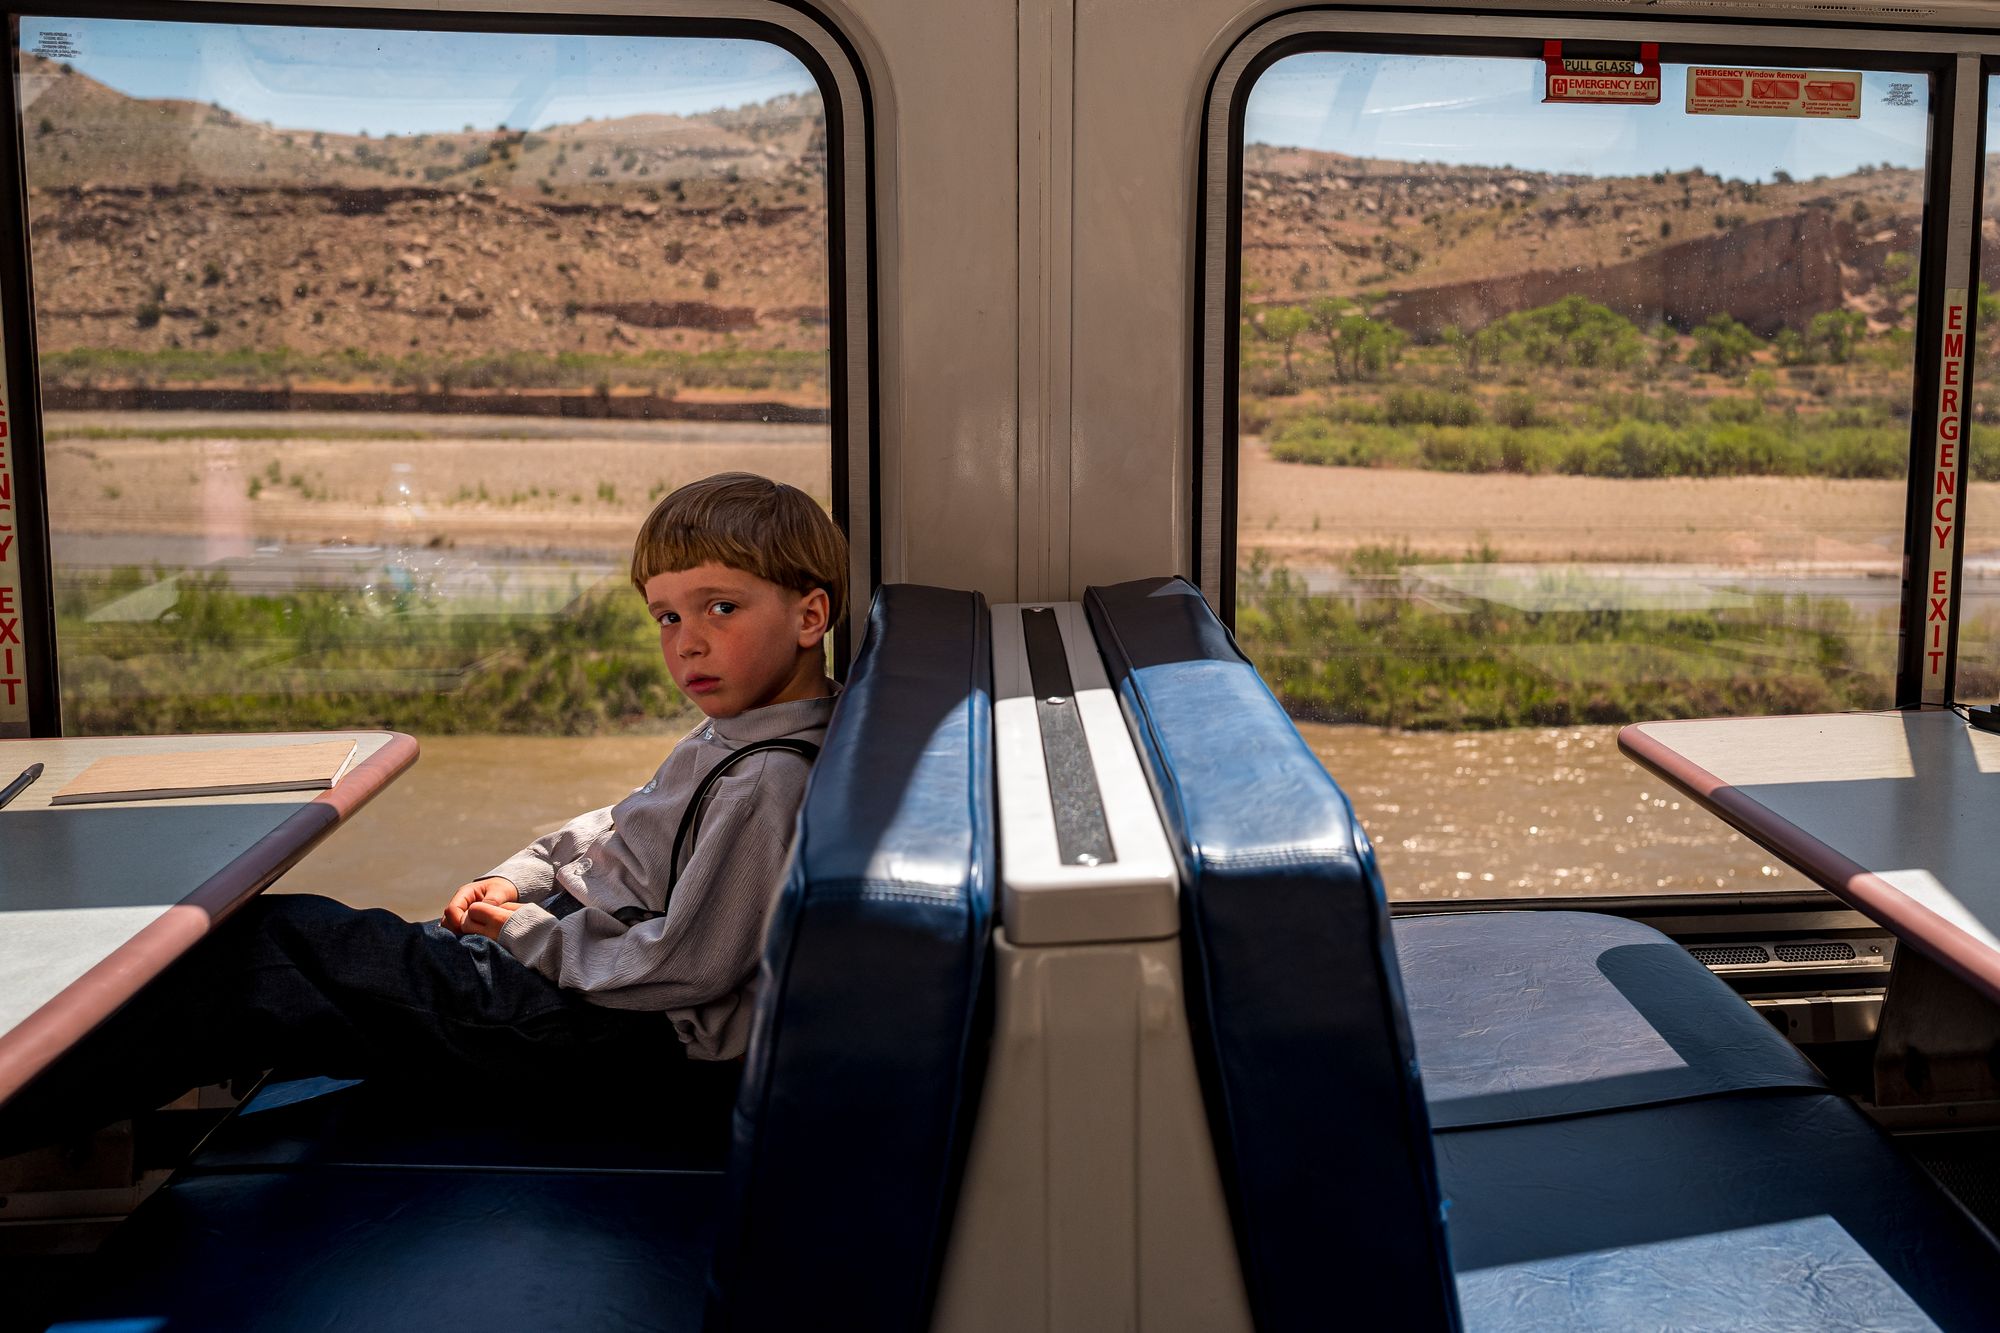 Mennonite boy sits alone in an Amtrak sightseer booth